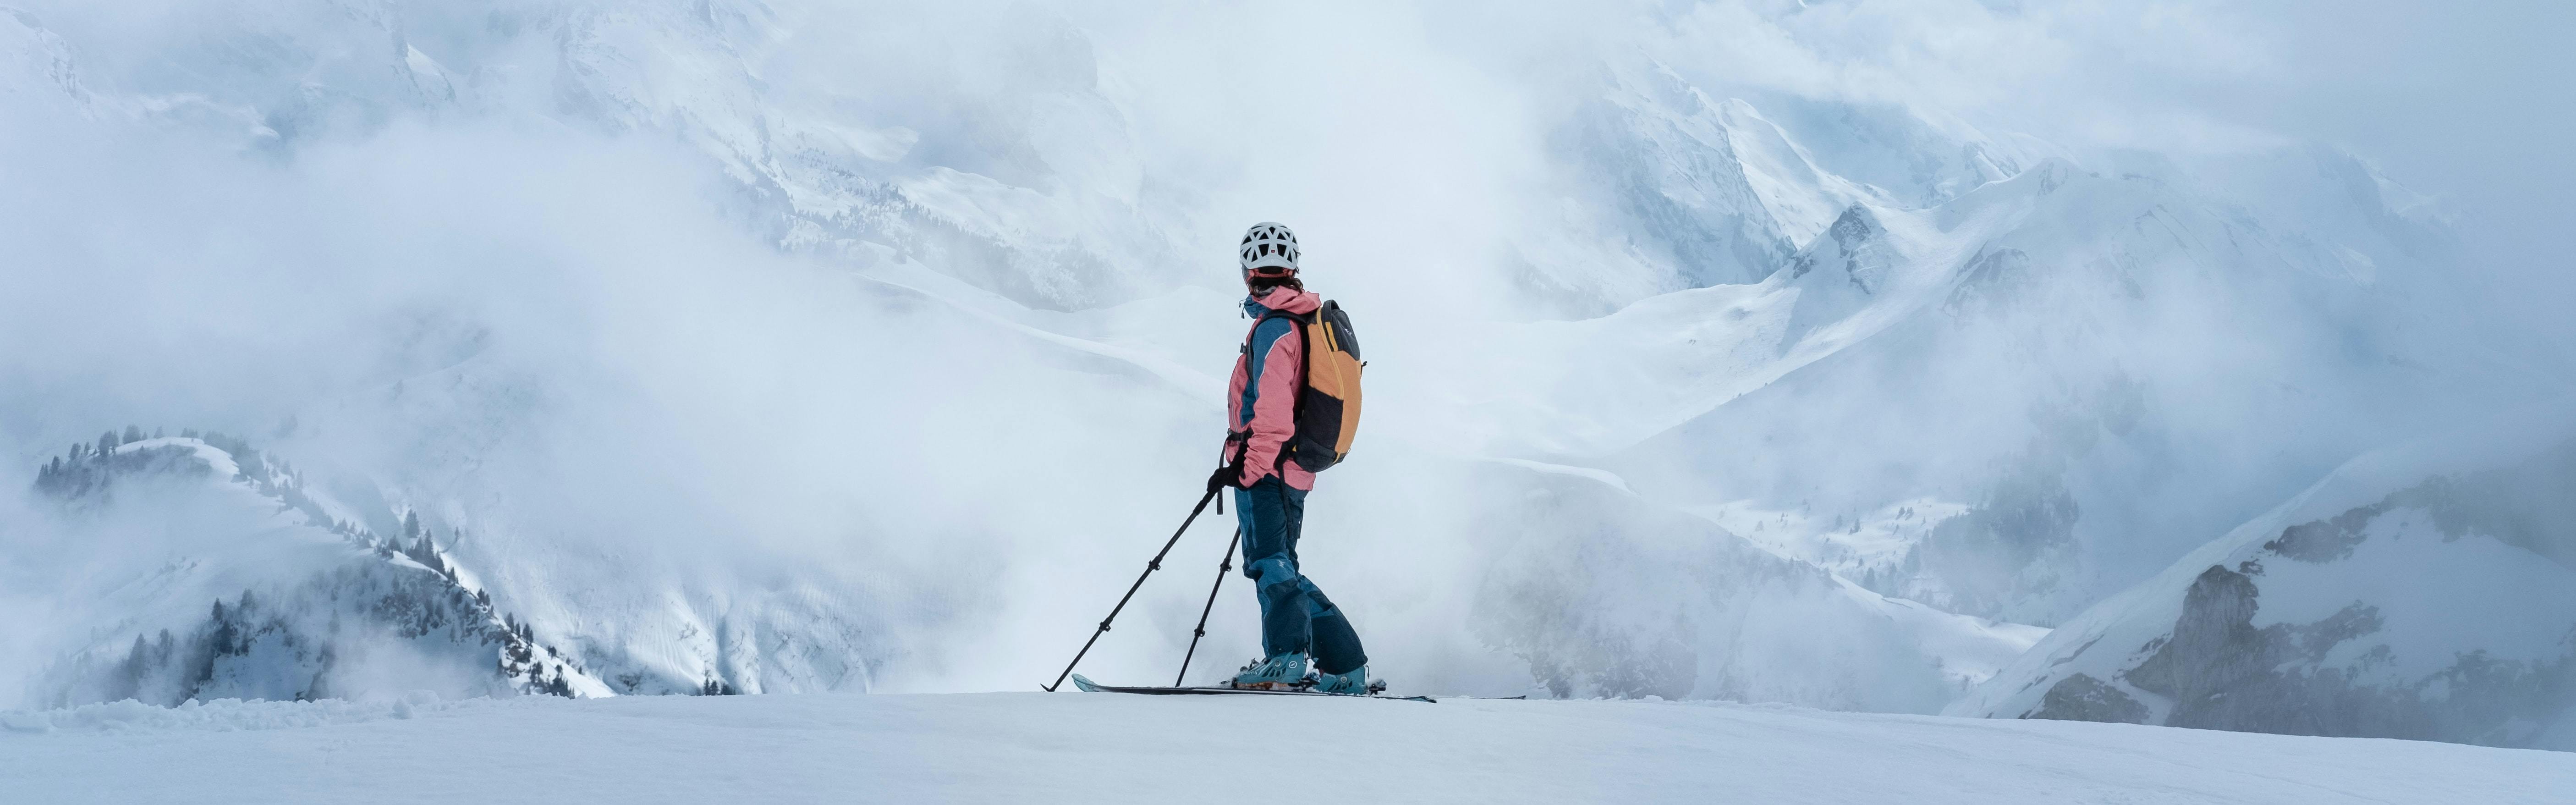 An Expert Guide to What to Wear Skiing and Snowboarding